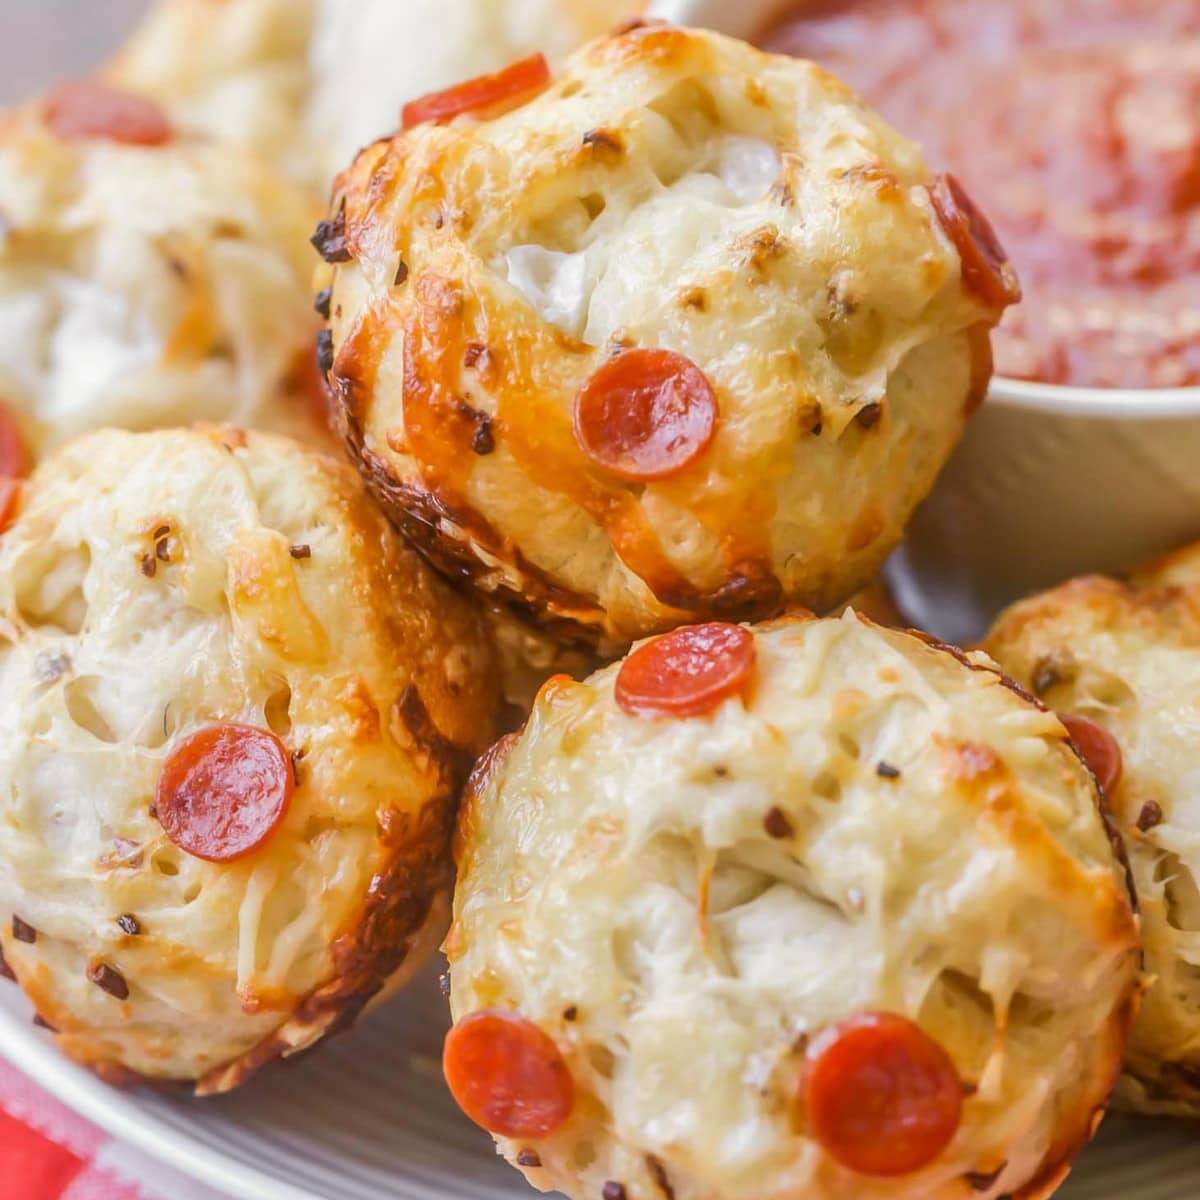 Finger food appetizers - cheesy pizza muffins topped with mini pepperoni.